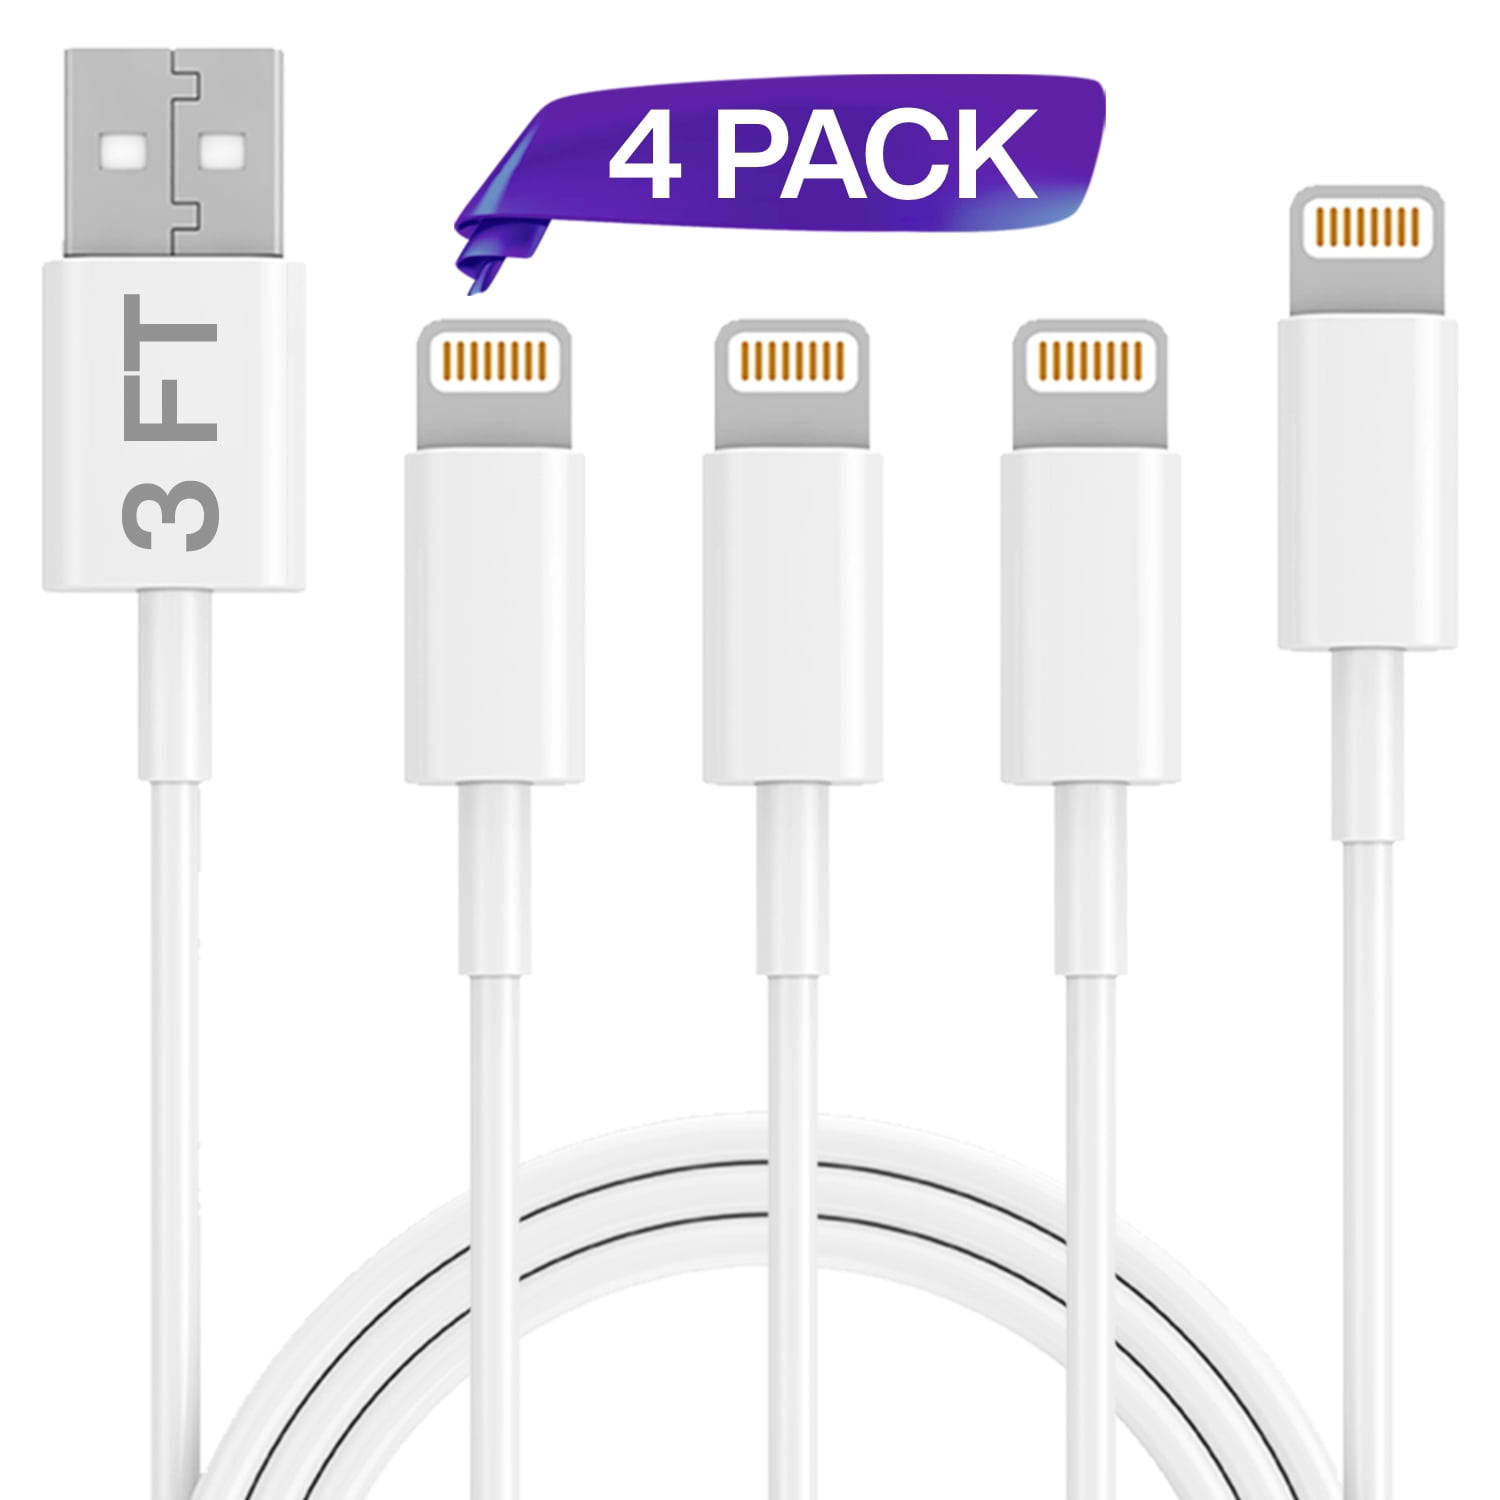 Charging & Syncing Cord for Apple iPhone Xs,Xs Max,XR,X,8,8 Plus,7,7 Plus,6S,6S Plus,iPad Air,Mini,iPod Touch,Case iPhone Lightning Cable Infinite Power MFI Certified 4 Pack 3FT USB Cable 